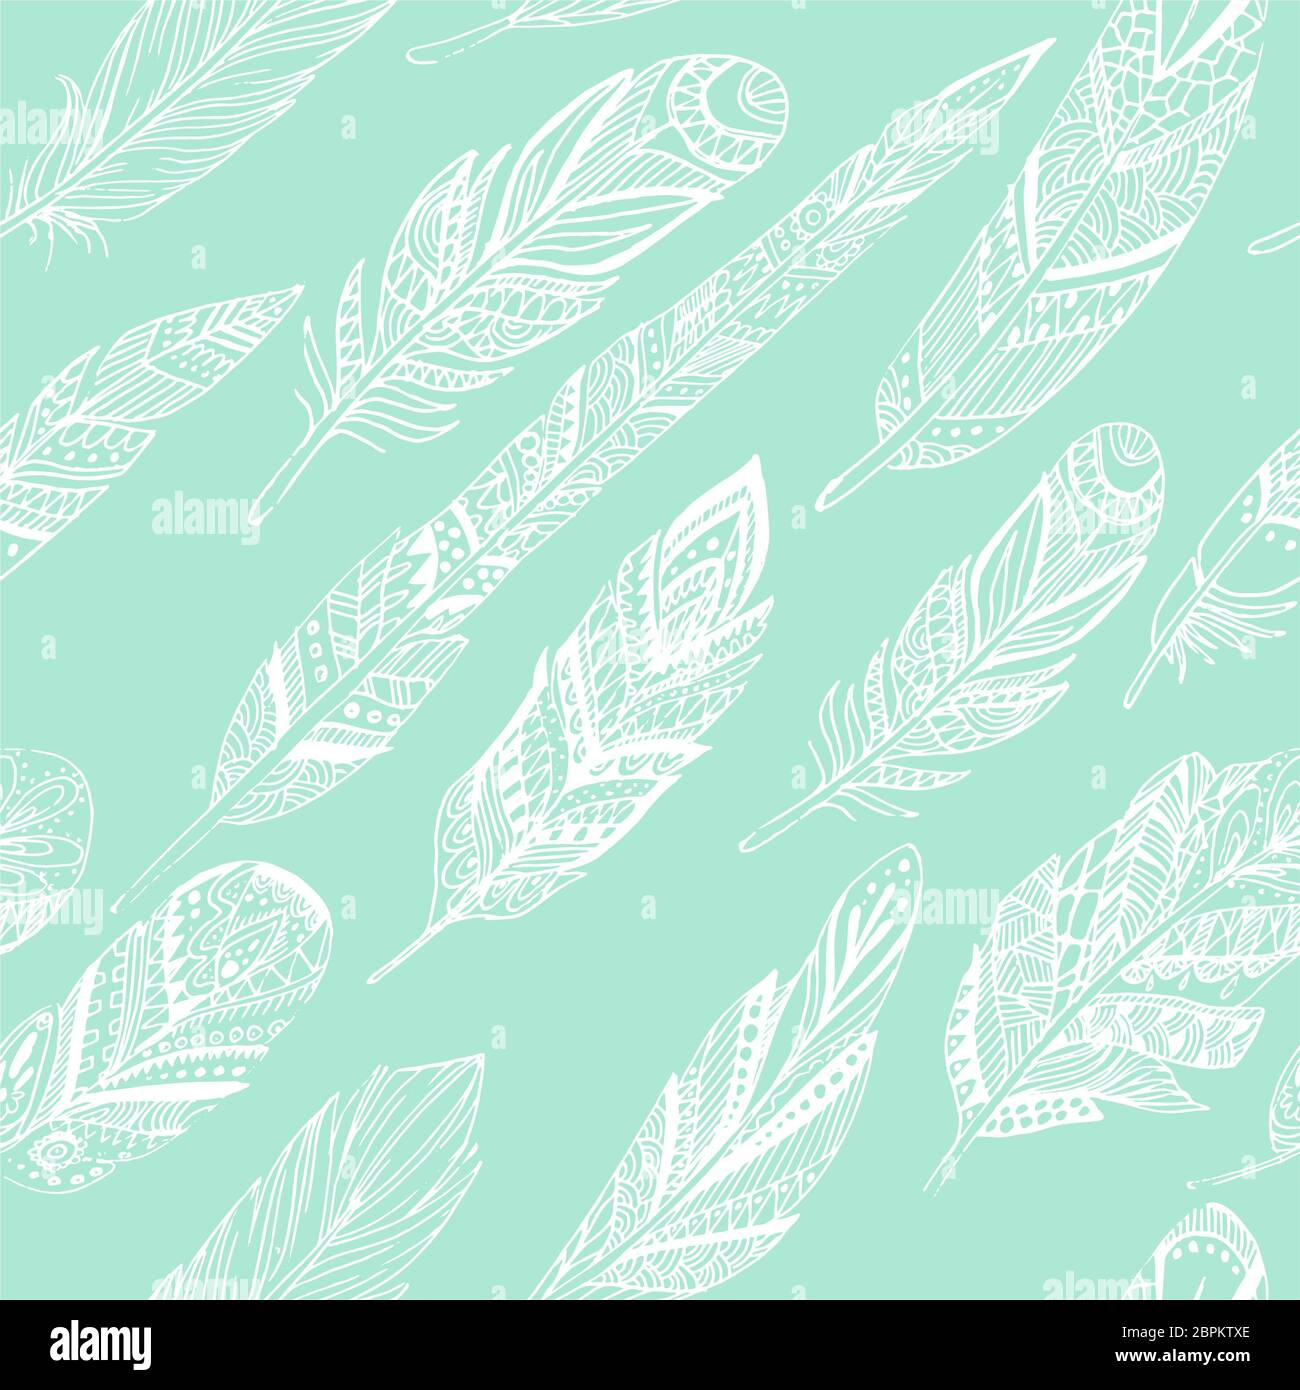 Seamless pattern with ethnic feathers. Tribal Feathers Vintage Pattern. Hand Drawn Doodles. Stock Photo